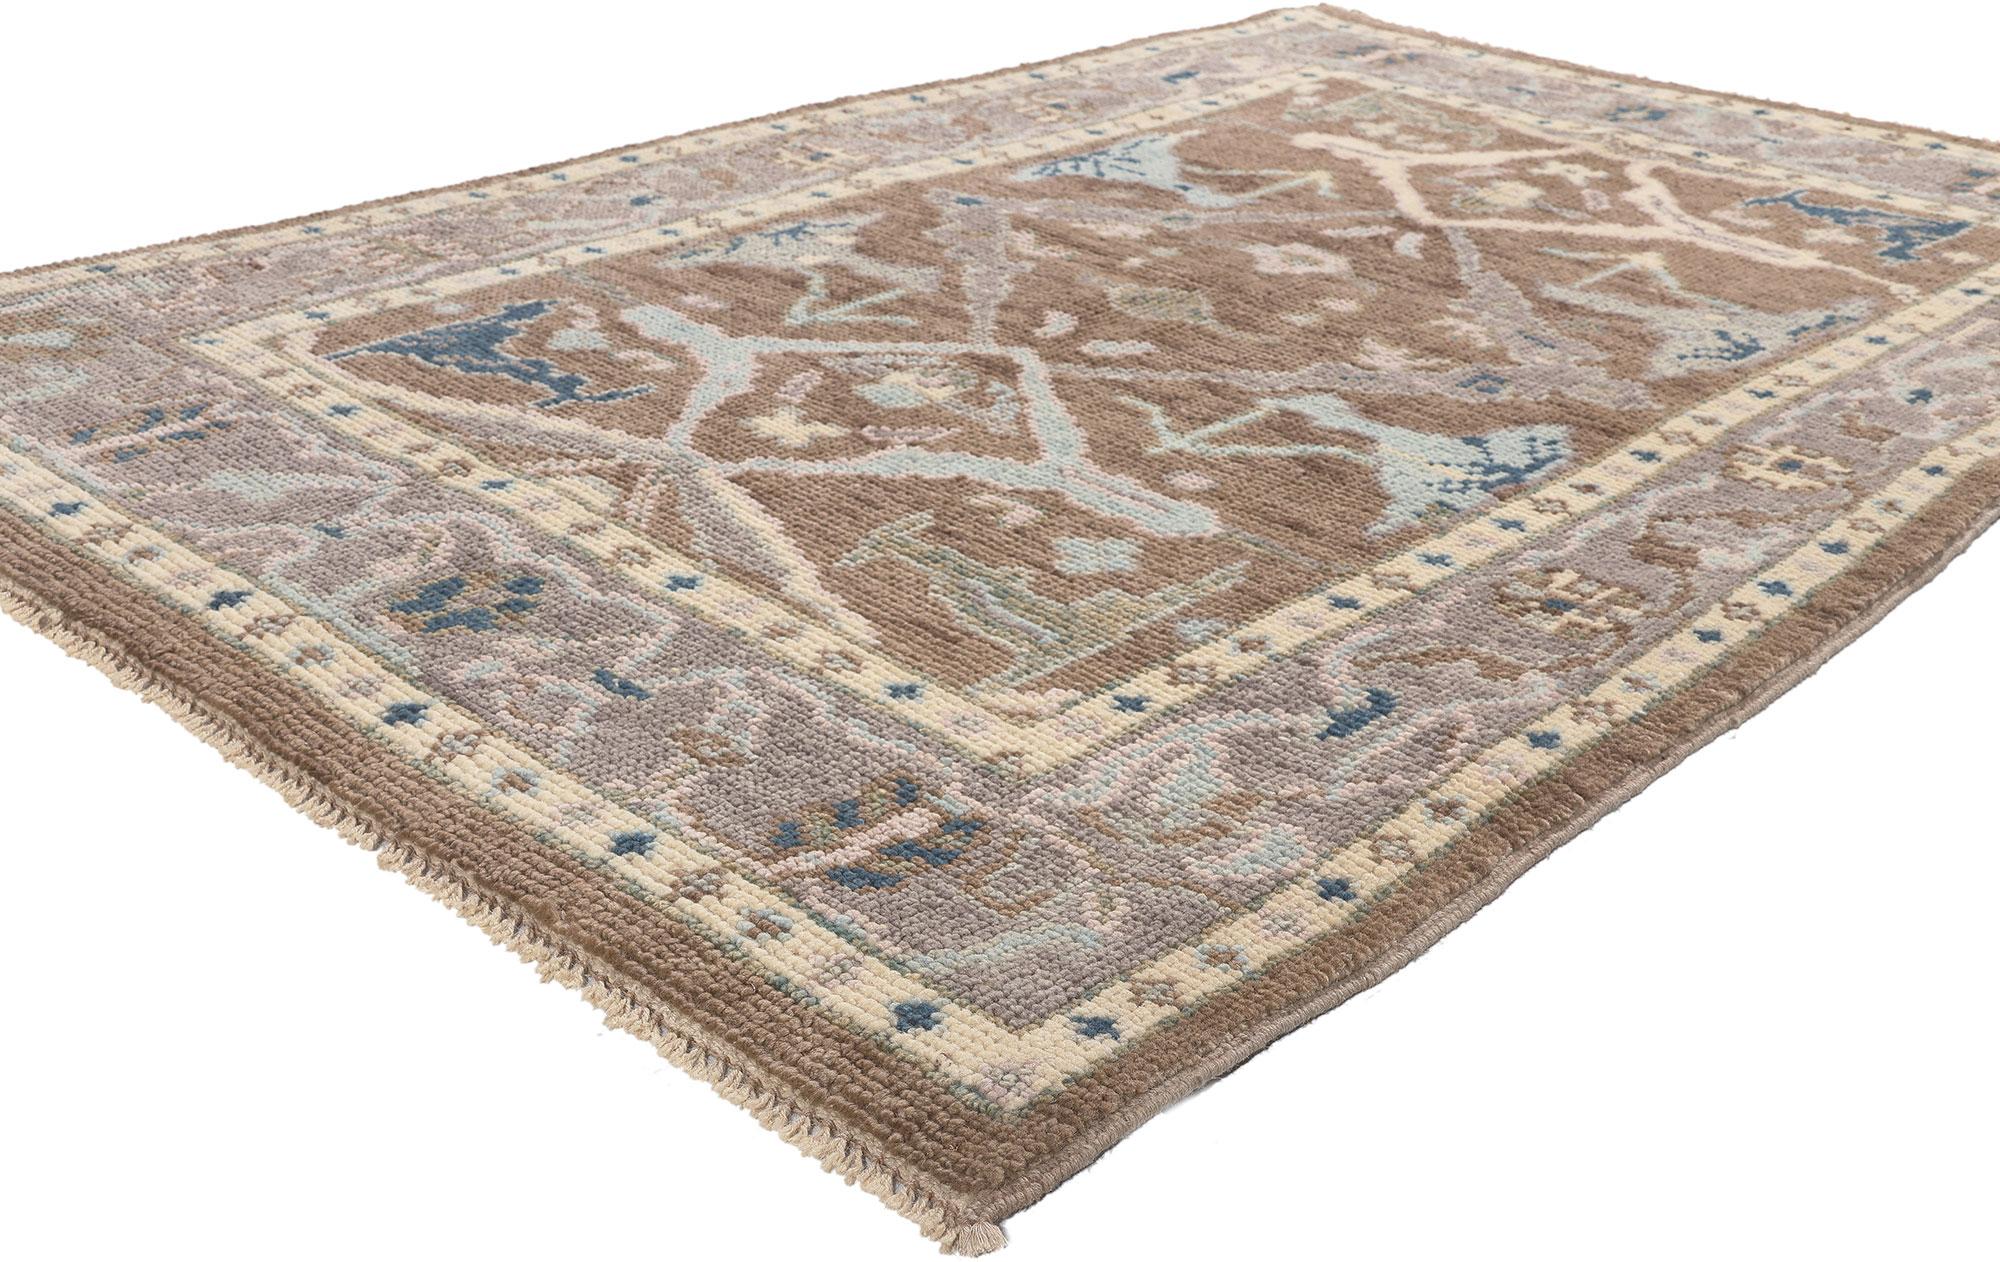 81003 Earth-Tone Modern Oushak Rug, 04'03 x 06'07.
Emanating timeless style with incredible detail and texture, this hand knotted wool modern Oushak rug is the answer to upscale design furnishings, whether generously or gingerly appointed. The